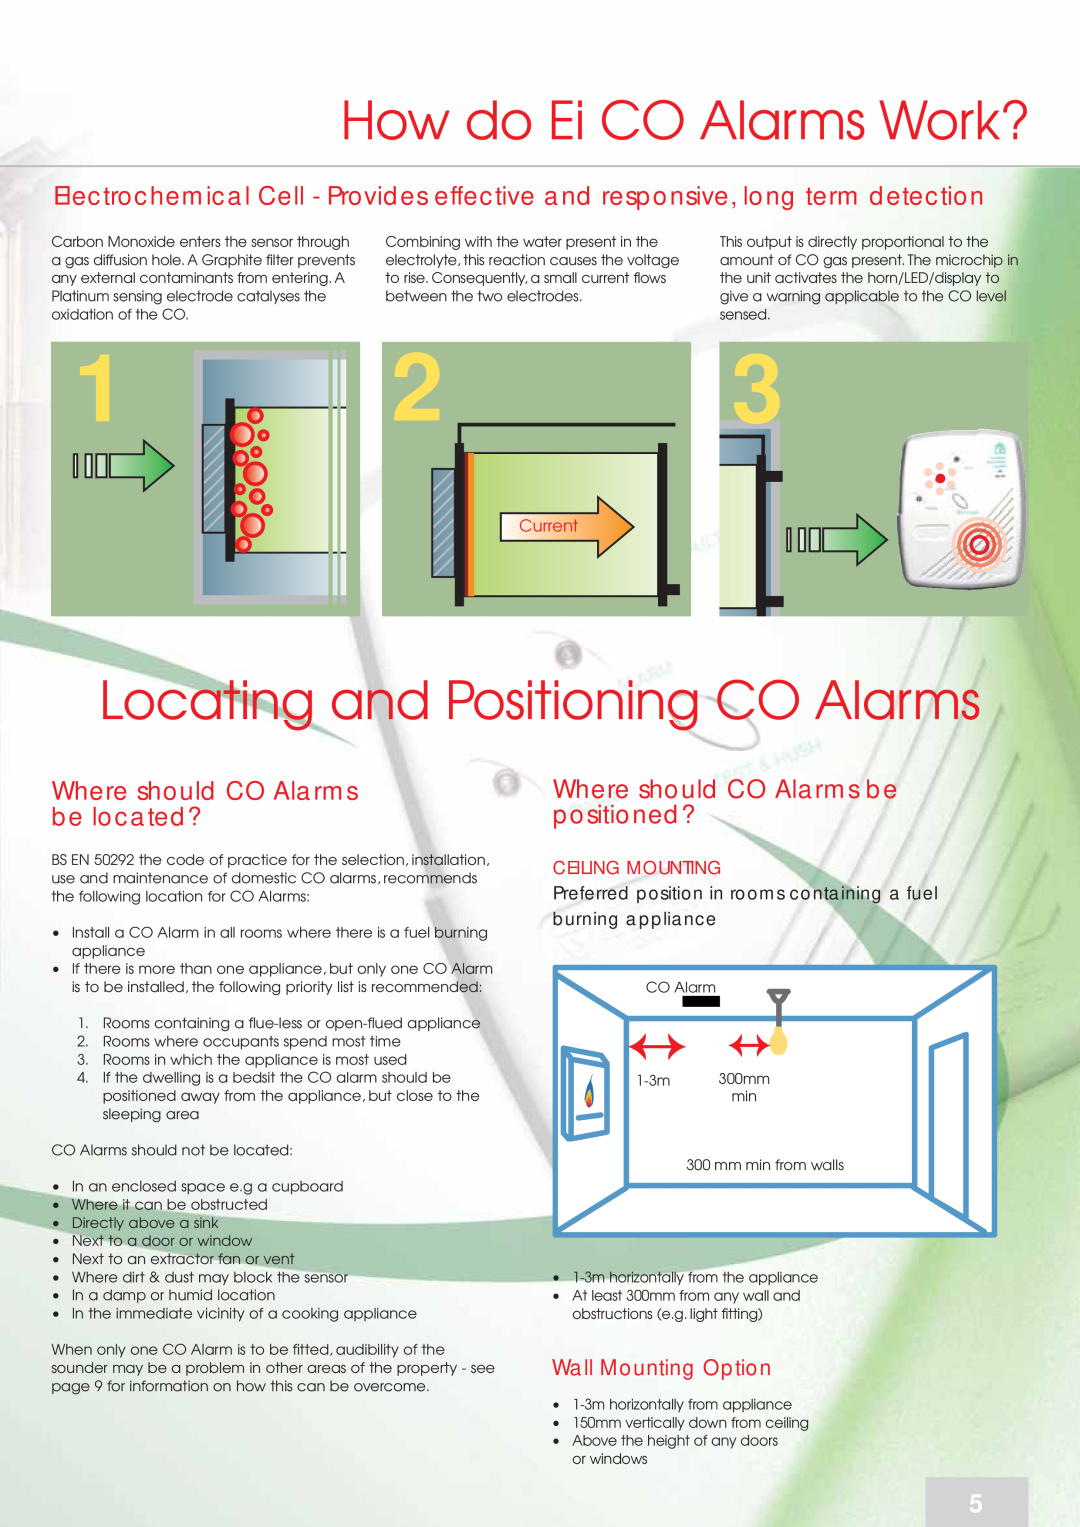 Aico 260 Series How do Ei CO Alarms Work?, Locating and Positioning CO Alarms, Where should CO Alarms be located?, Current 